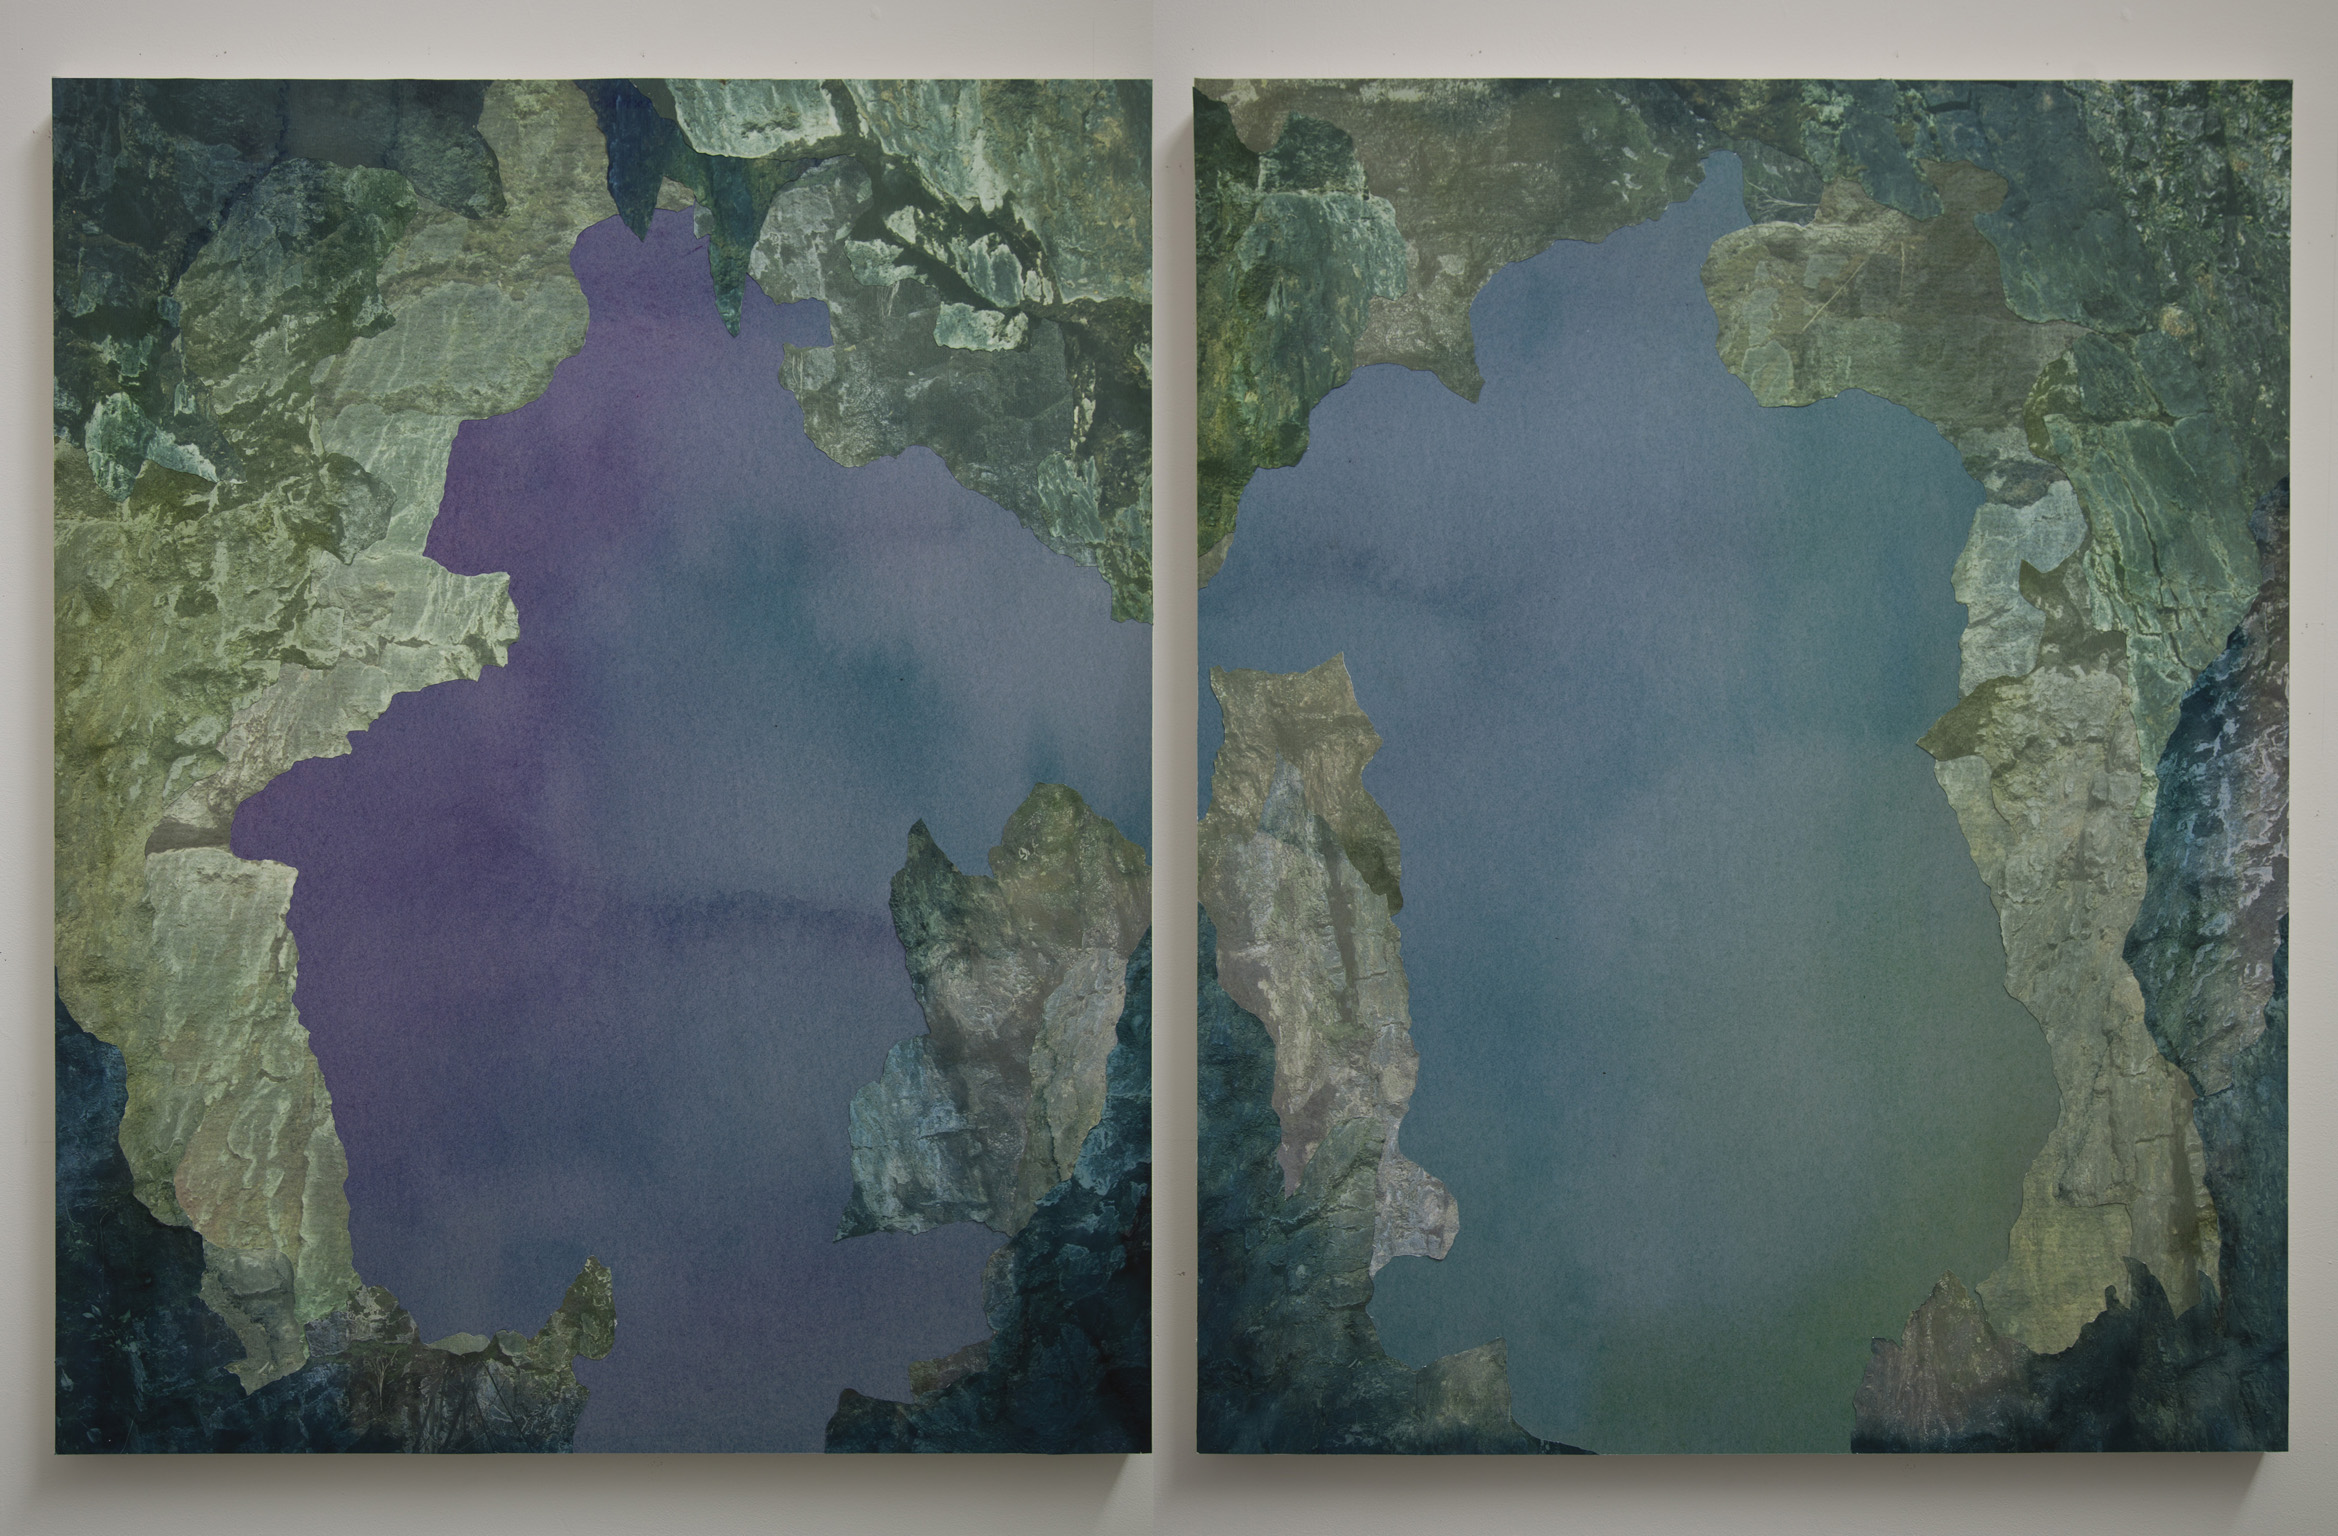   Cavern Diptych,  archival pigment prints, collage on panel, 54" x 43" each, 2012.  